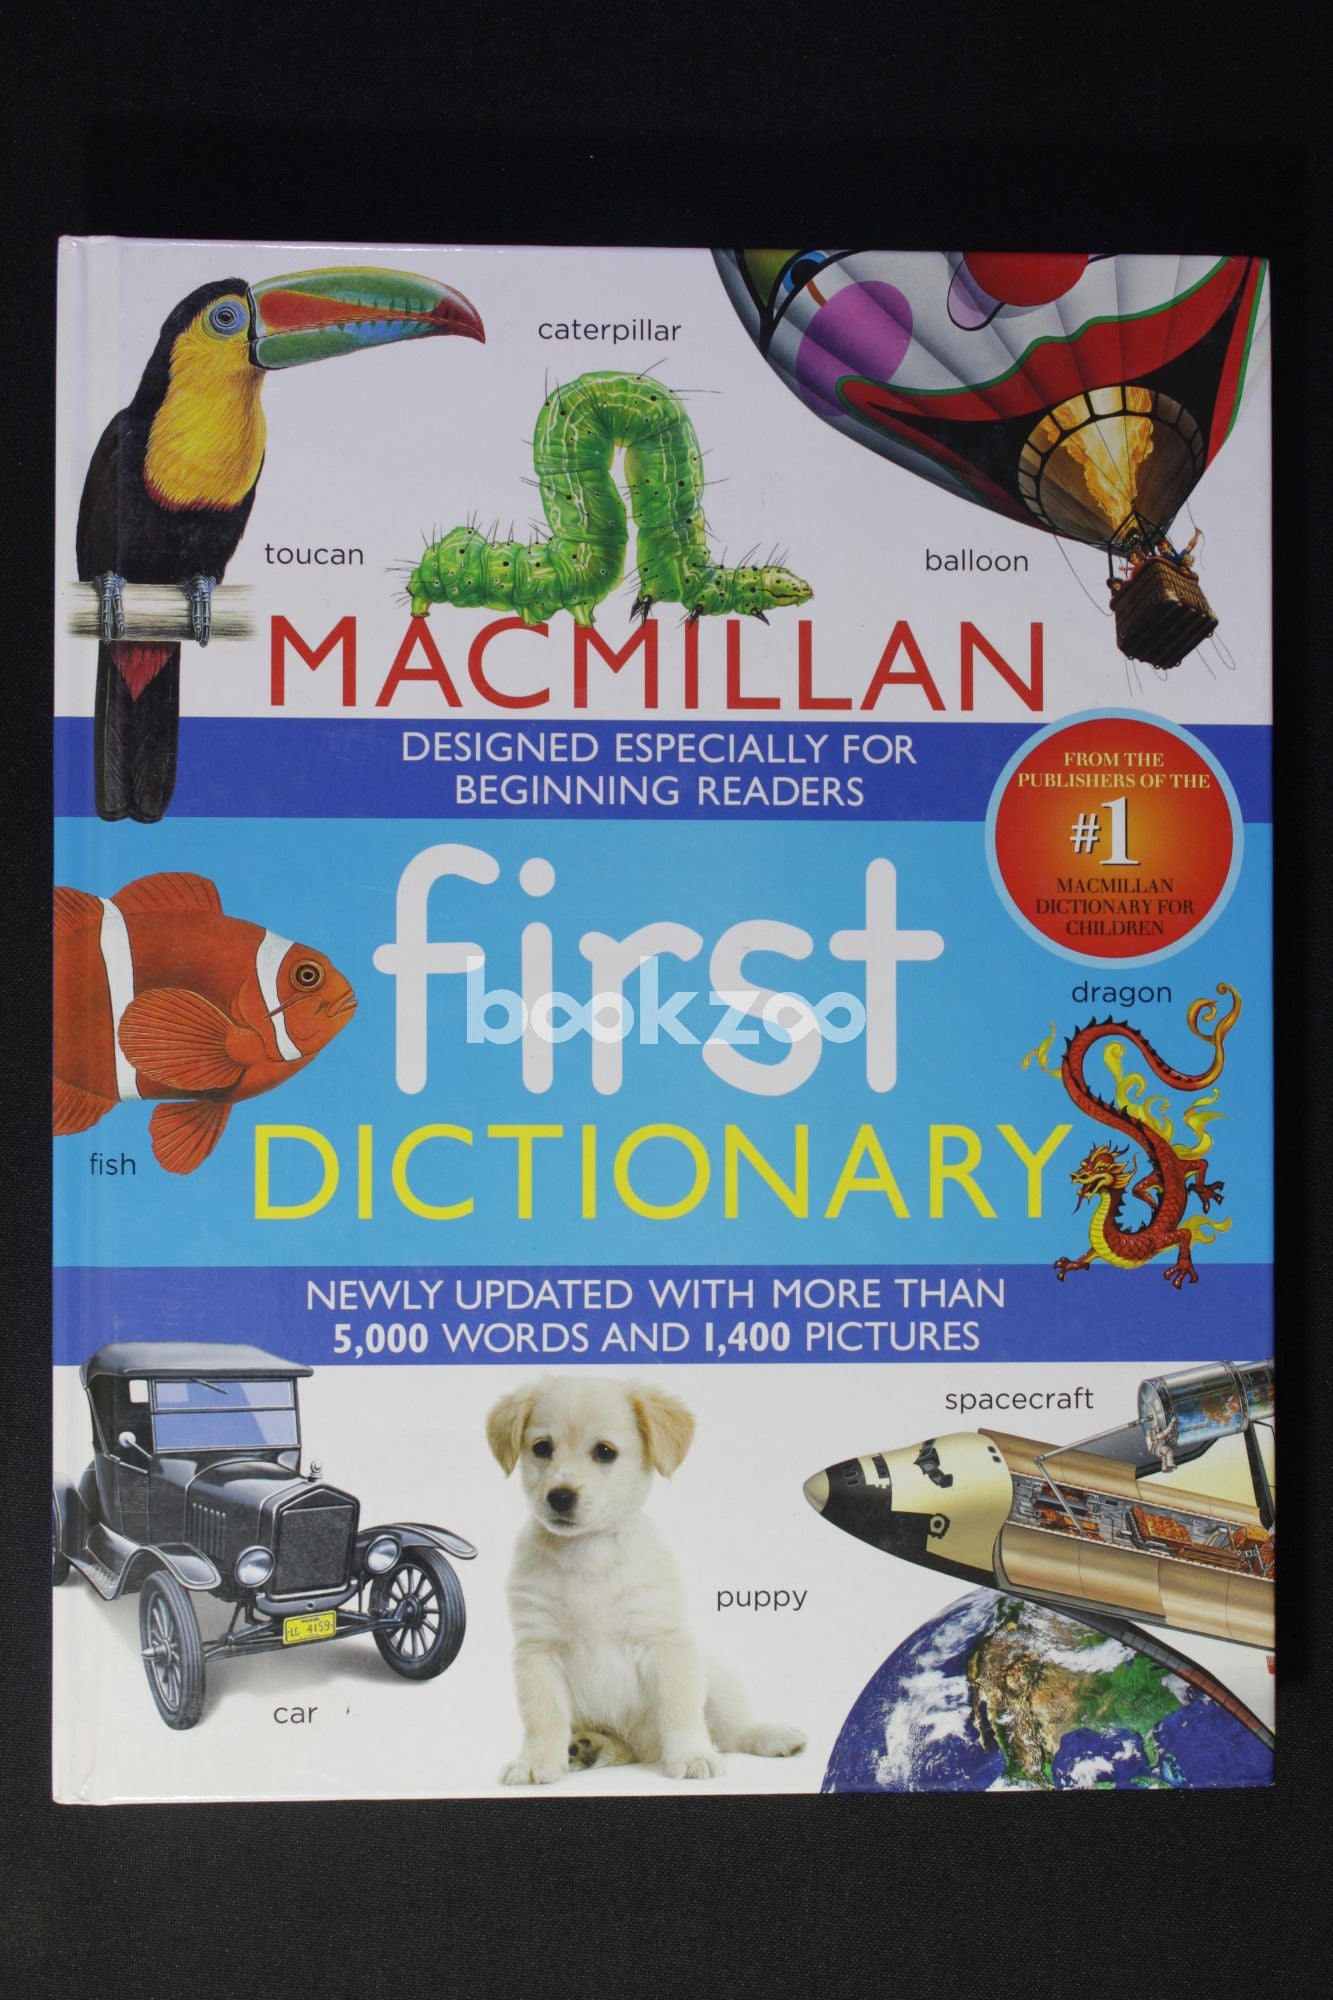 Buy　Dictionary　amp;　Macmillan　First　—　by　bookstore　Simon　Schuster　at　Online